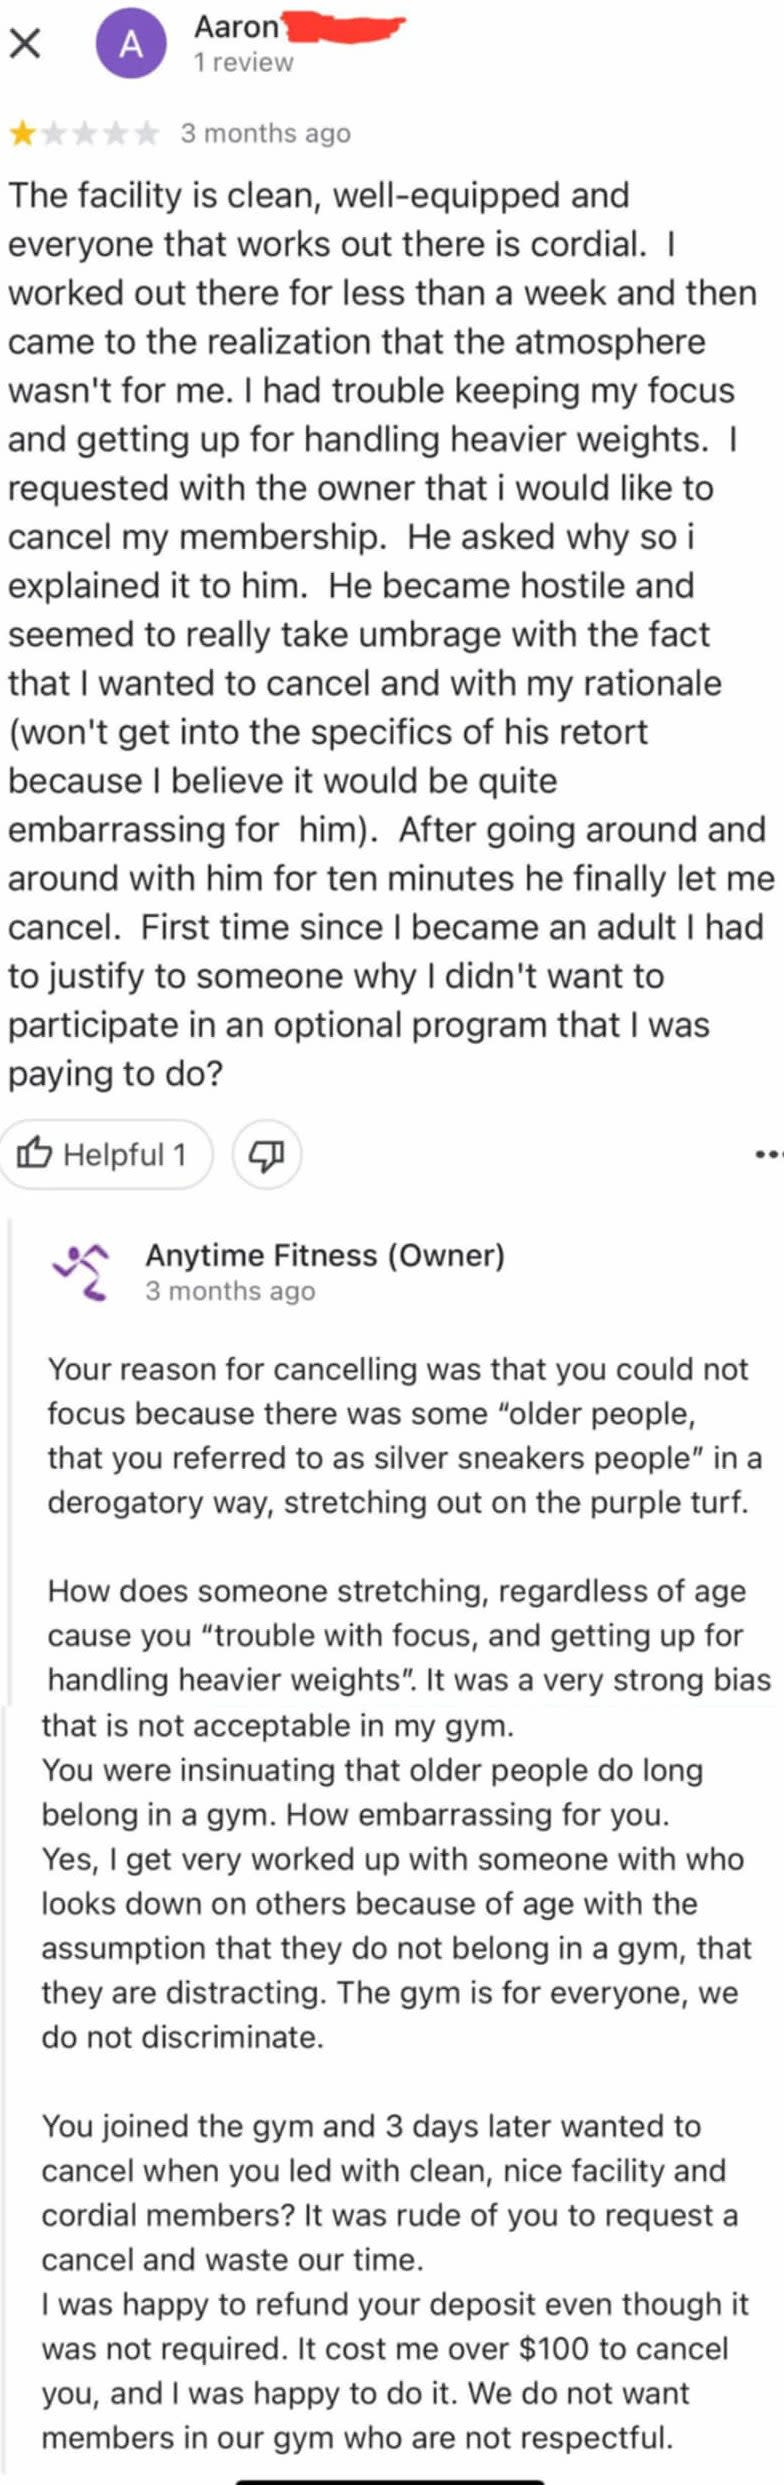 gym review complimenting facility and staff, but saying they couldn't keep their focus so they decided to cancel and the owner was difficult. owner responds saying the person complained about "old people" in the gym and they did give a refund